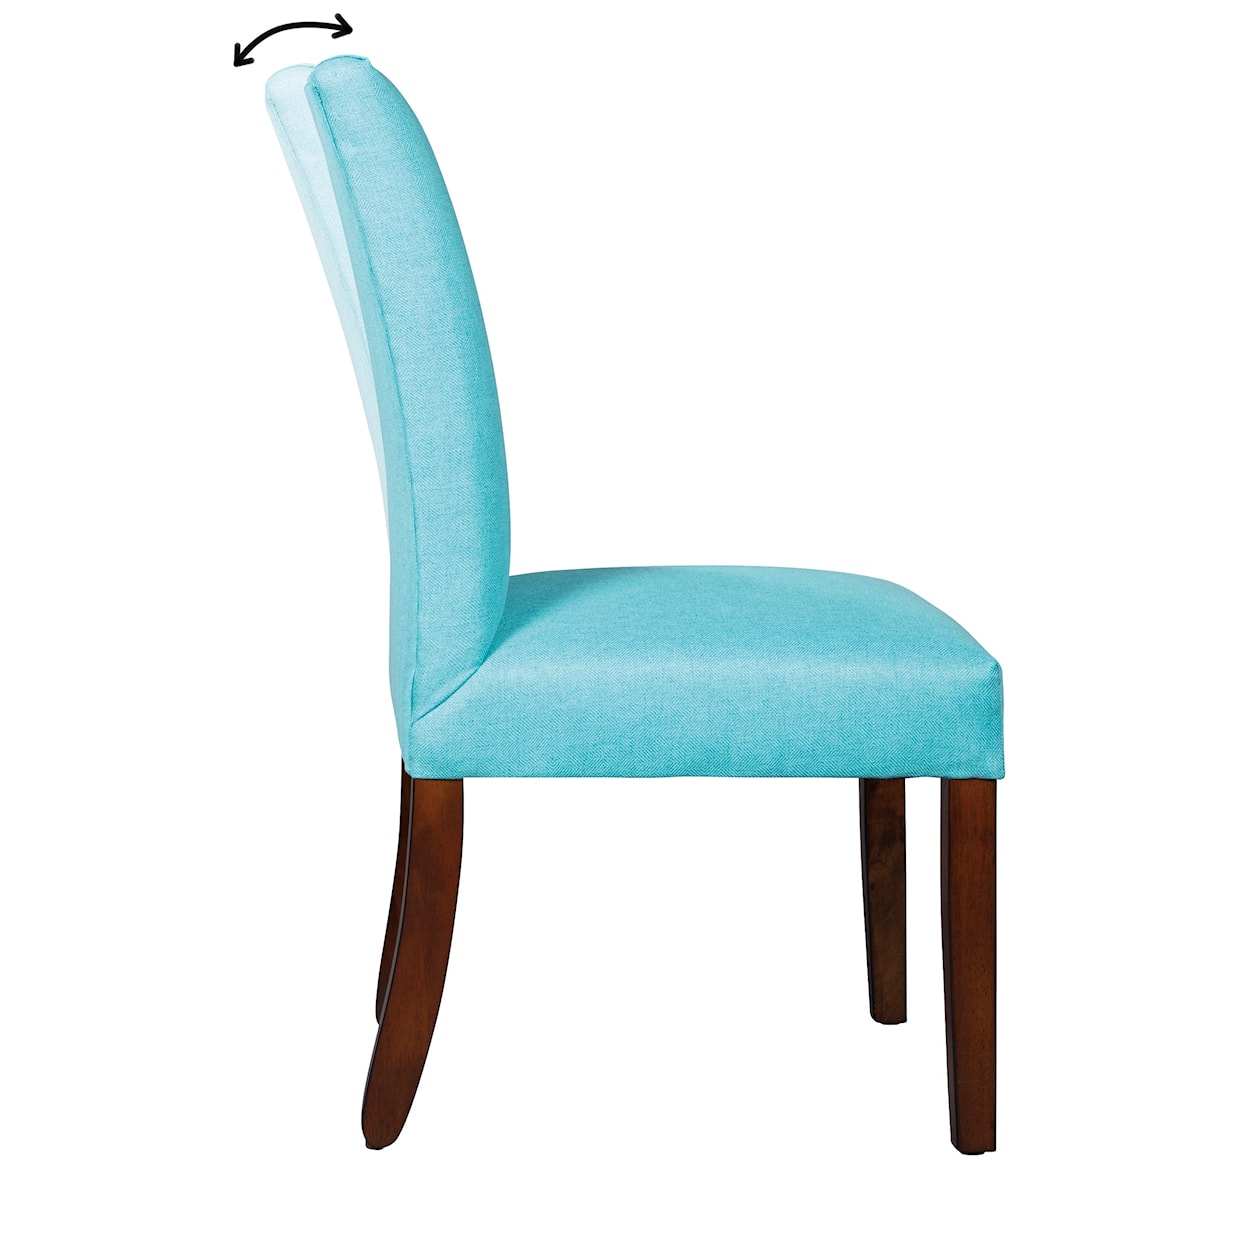 Hekman Upholstery Joanna Dining Chair with Flex Back